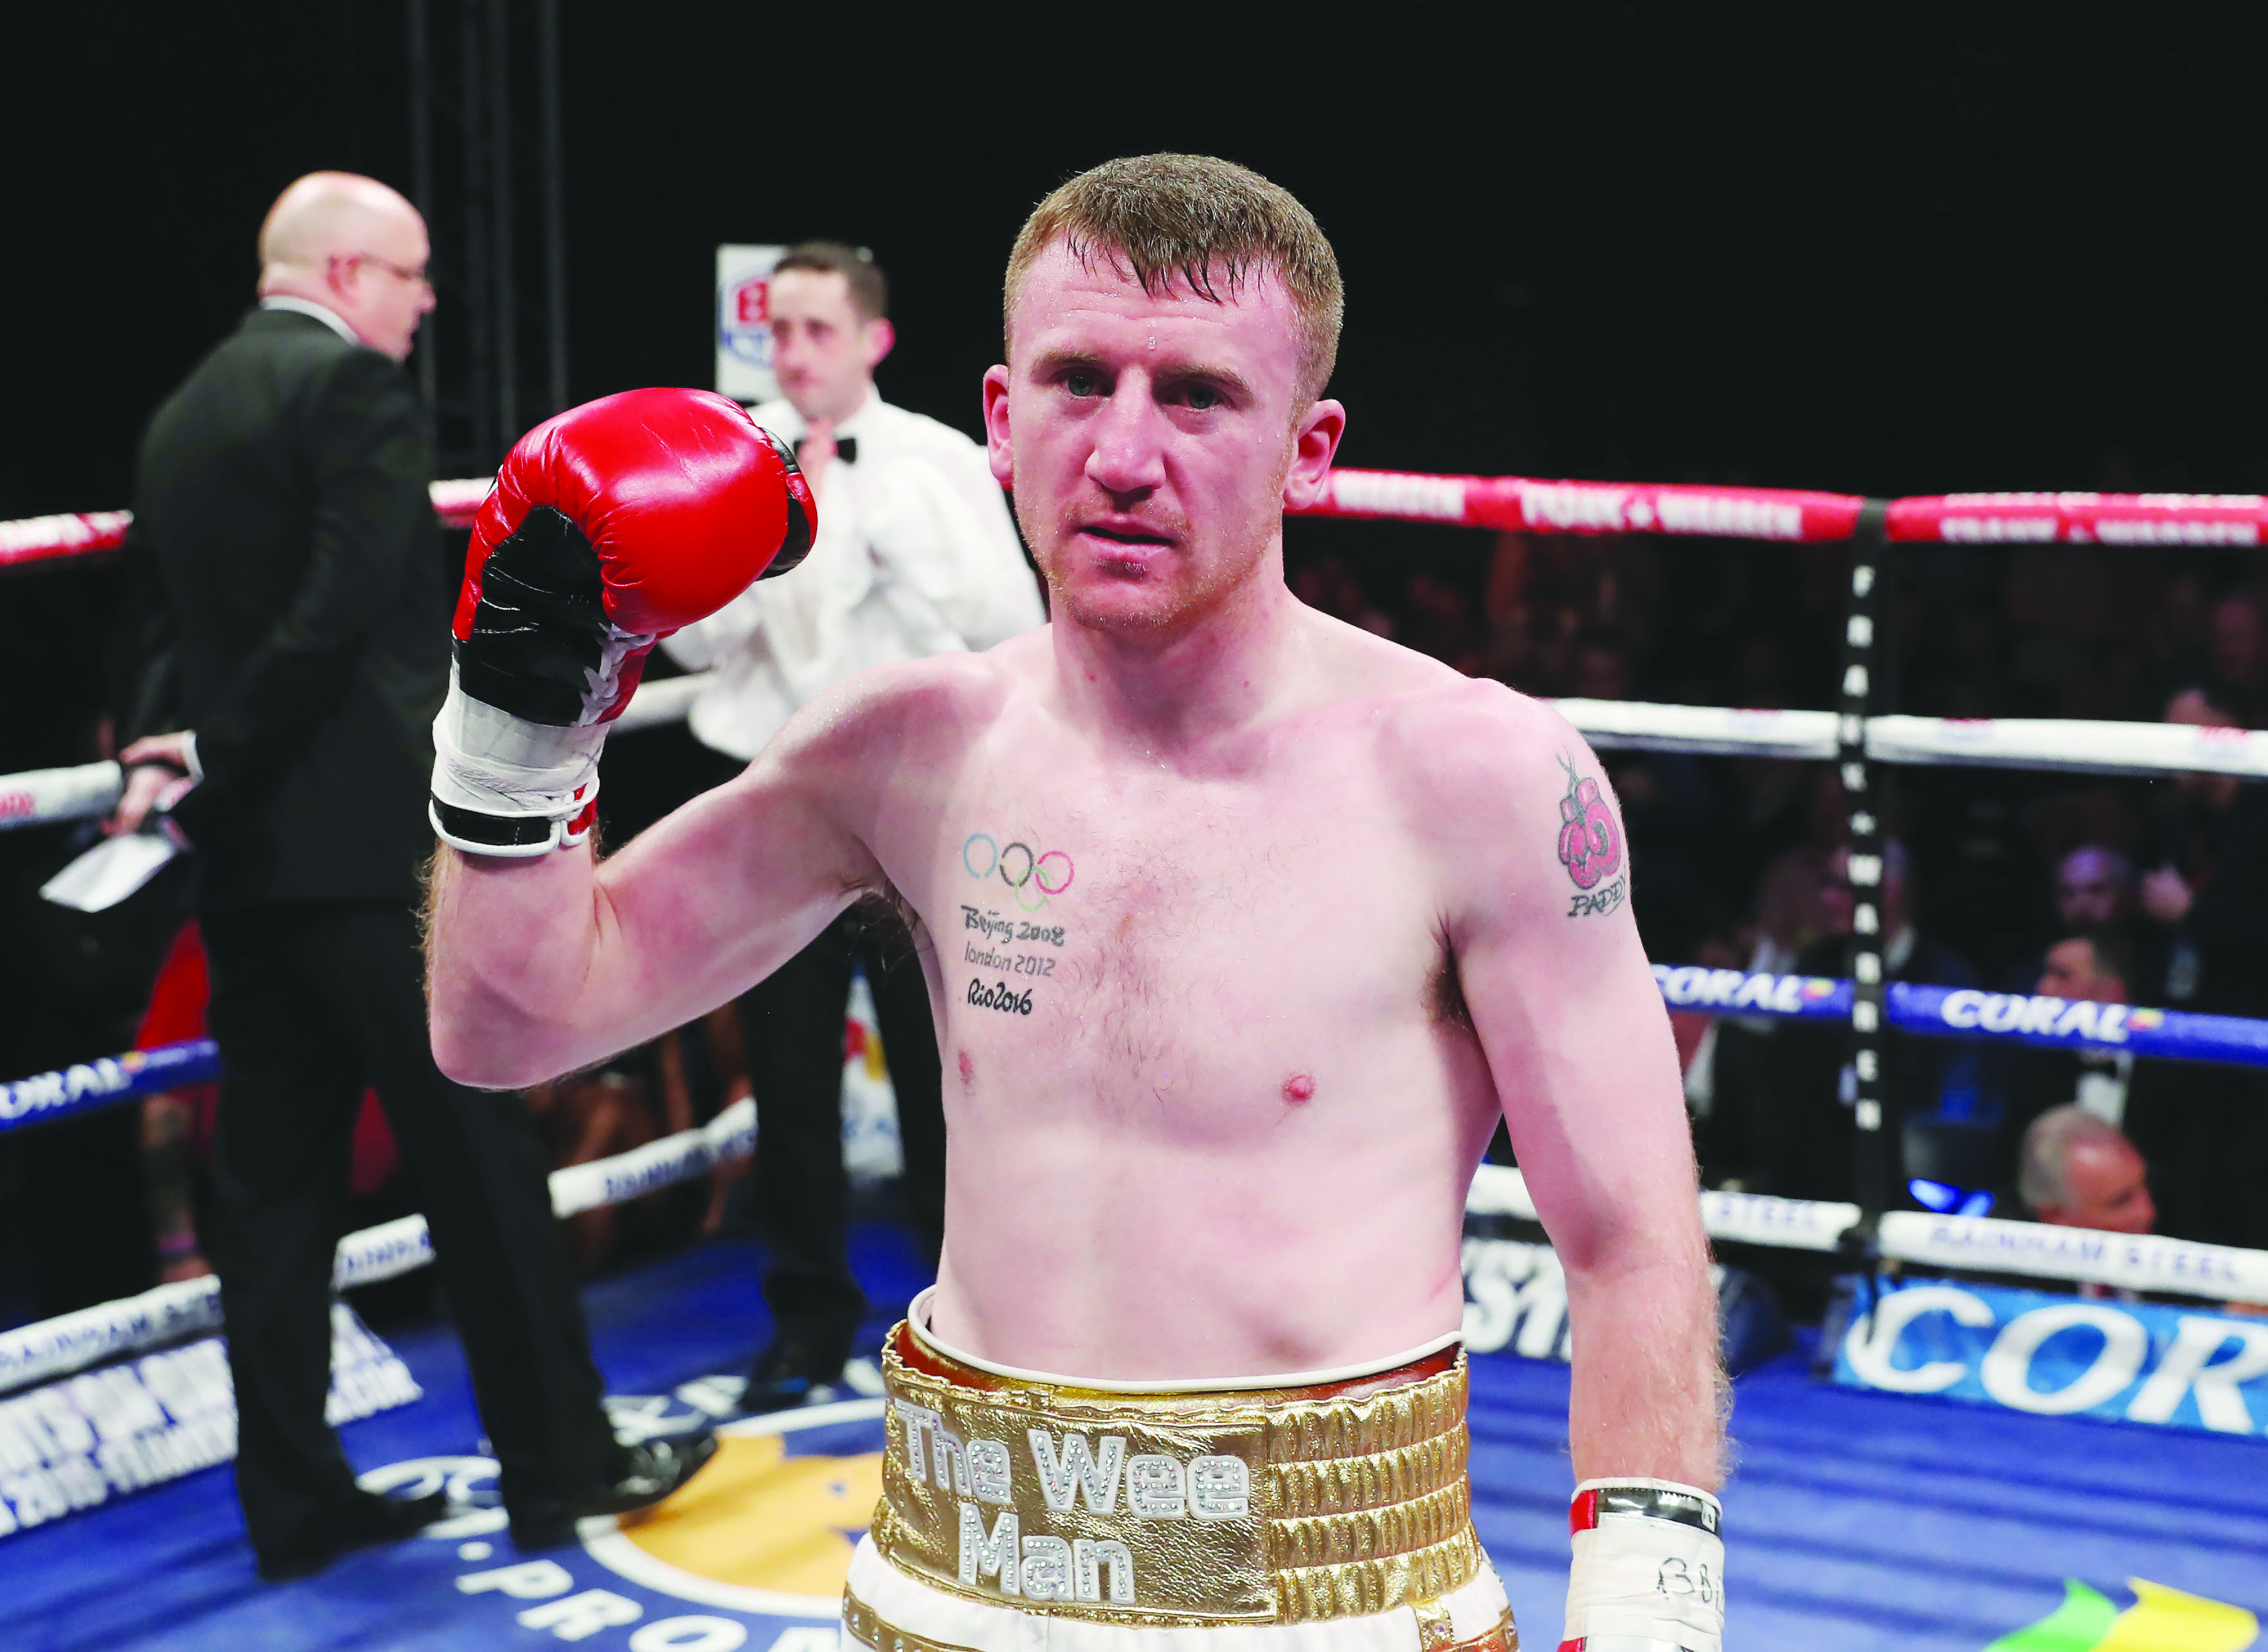 Paddy Barnes was disappointed his first pro fight ended in a win by disqualification against Stefan Slavchev back in November